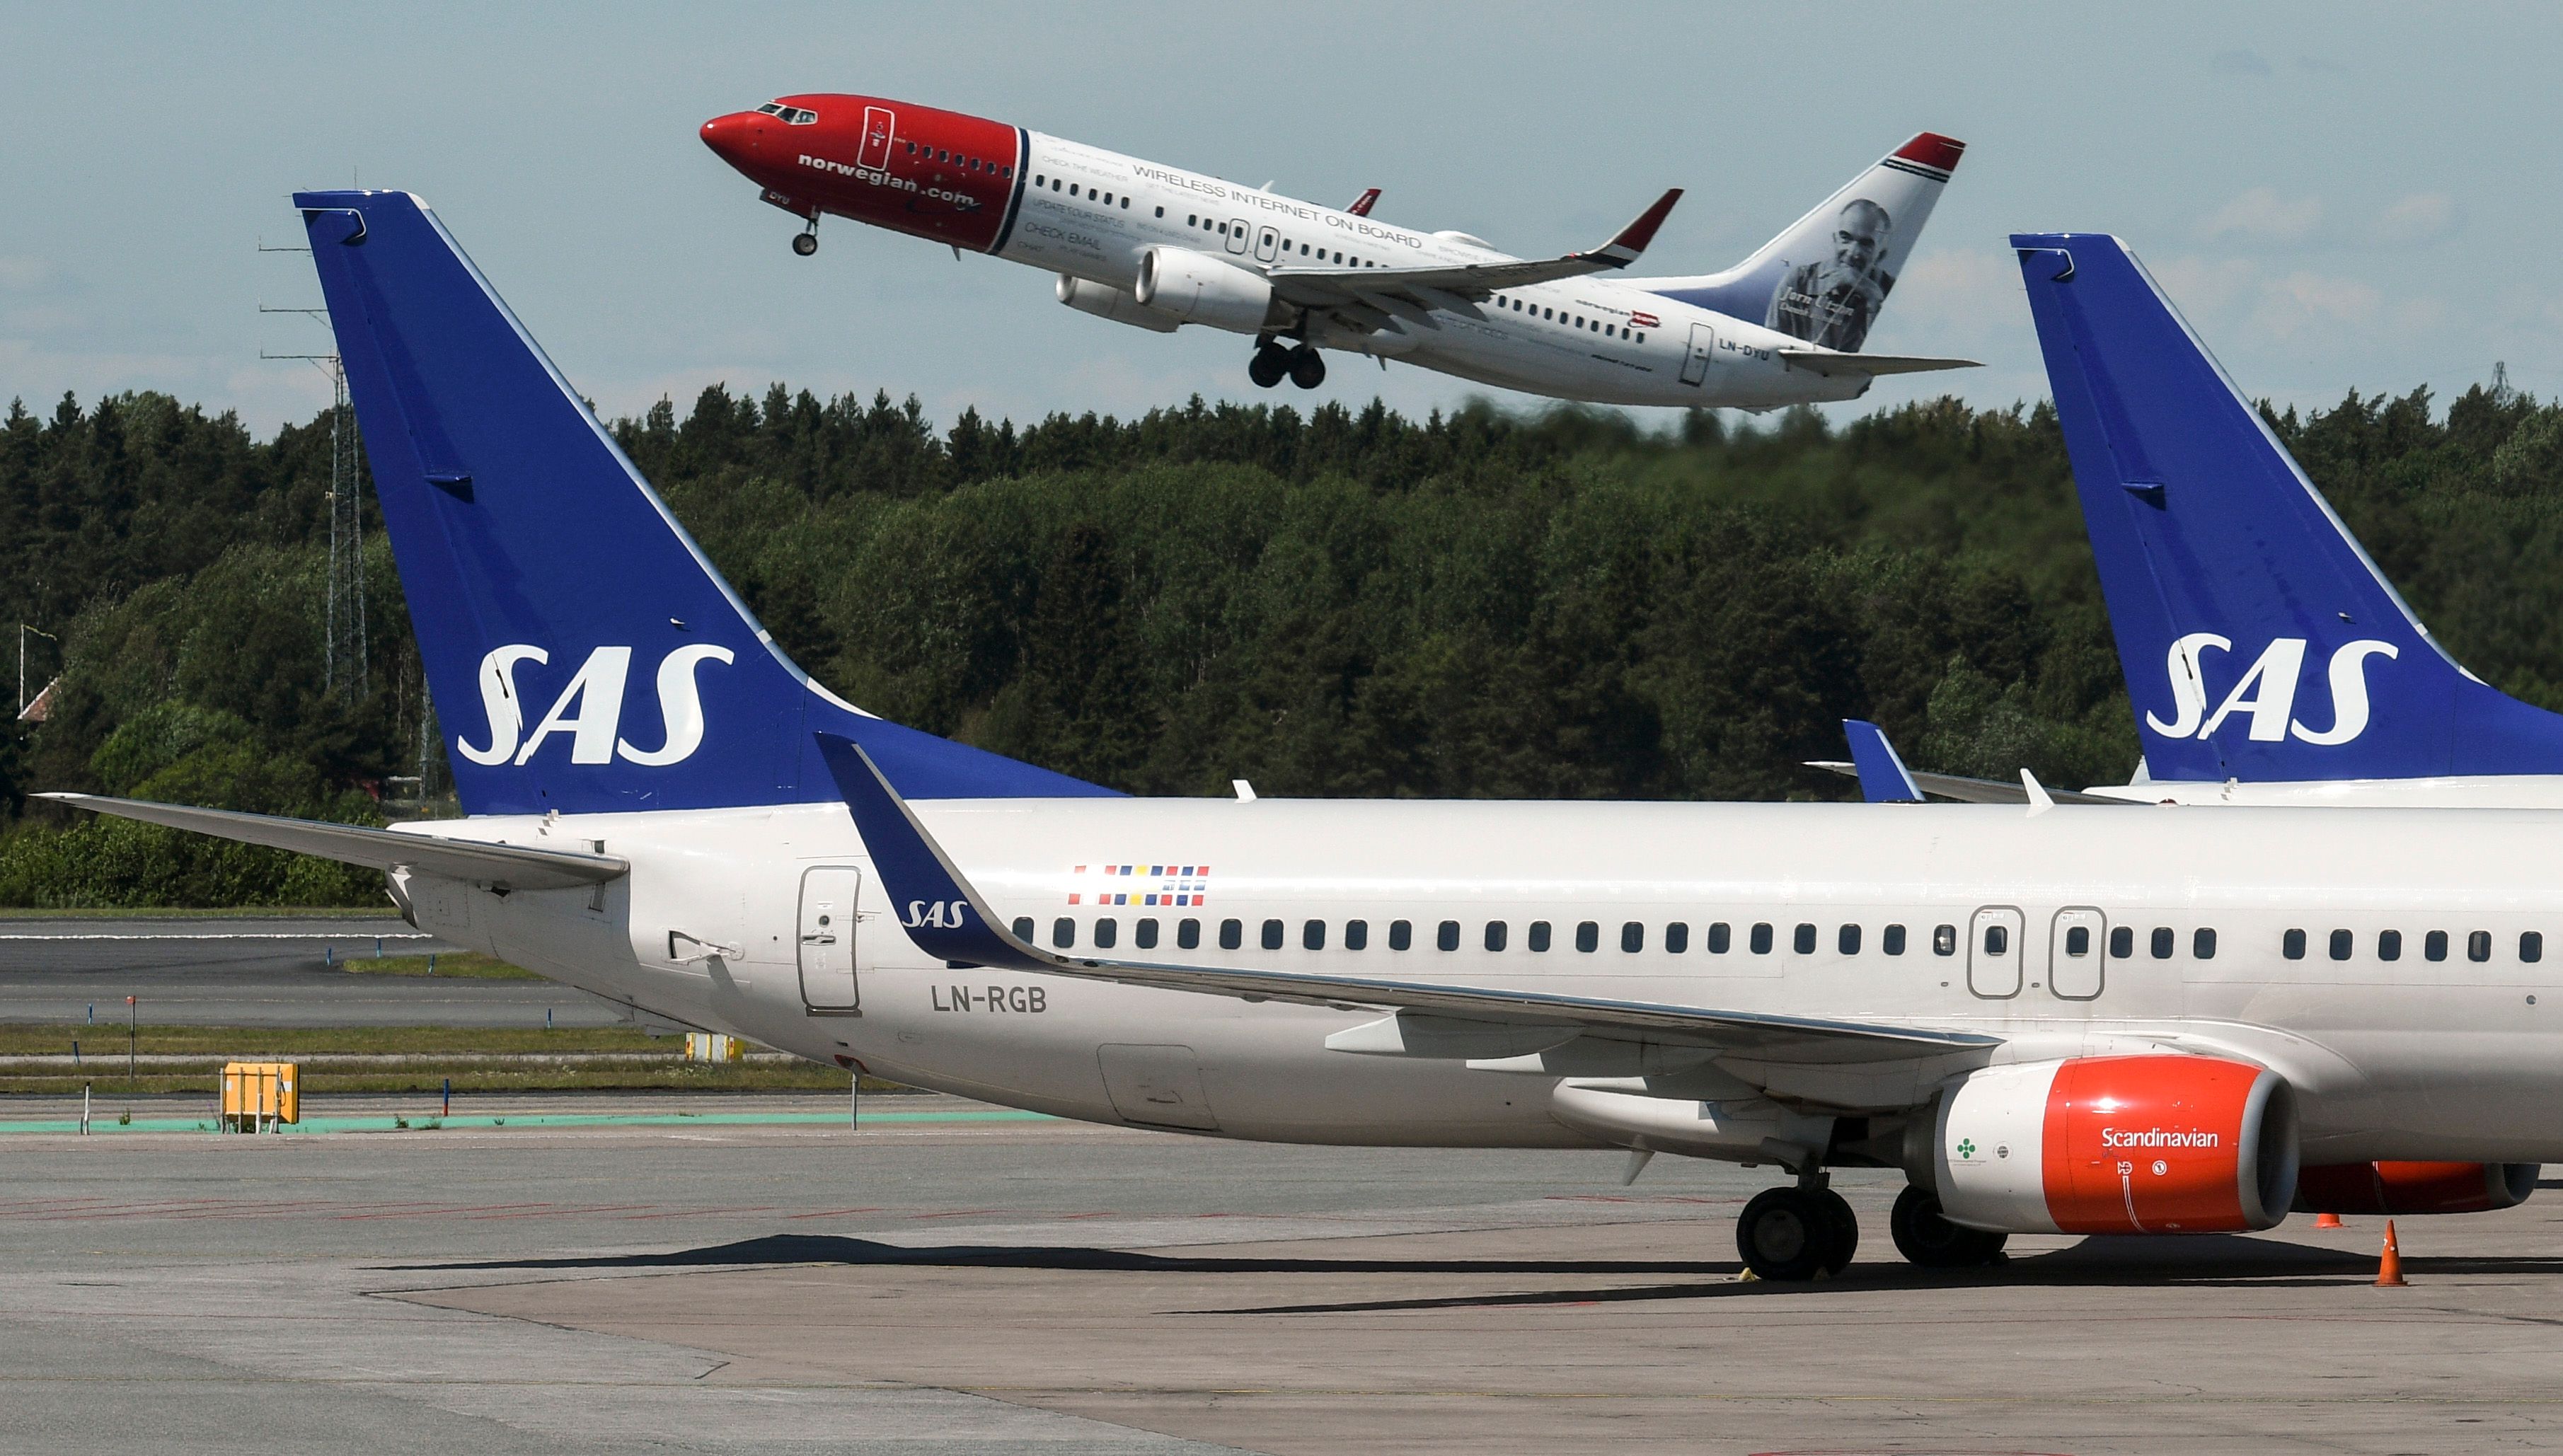 Norwegian plane taking off from Stockholm airport with SAS planes in the foreground